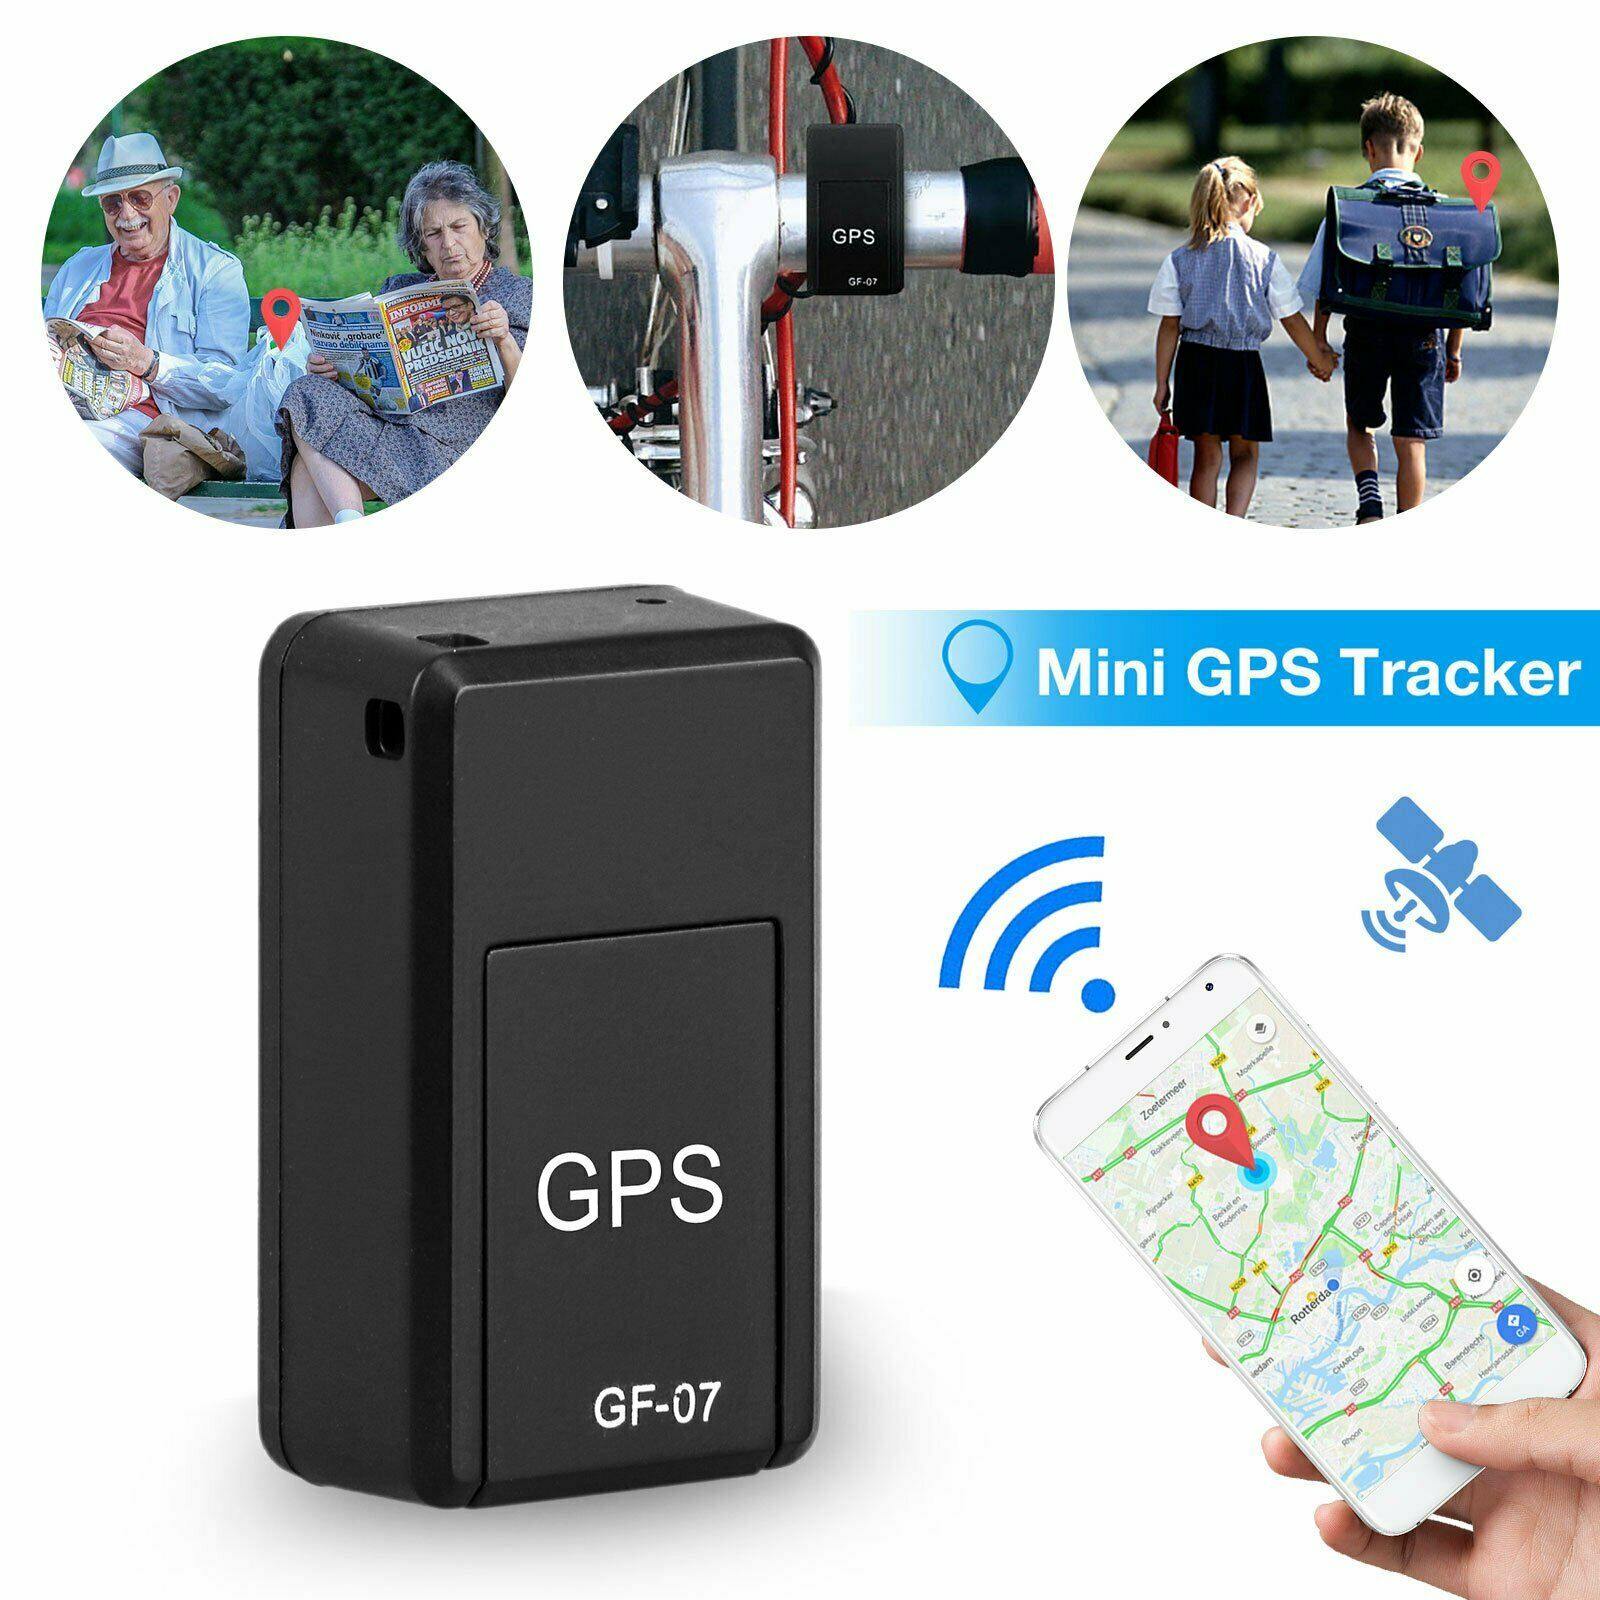 MAGNETIC Mini GPS Tracker Real- Time - MY STORE LIVING